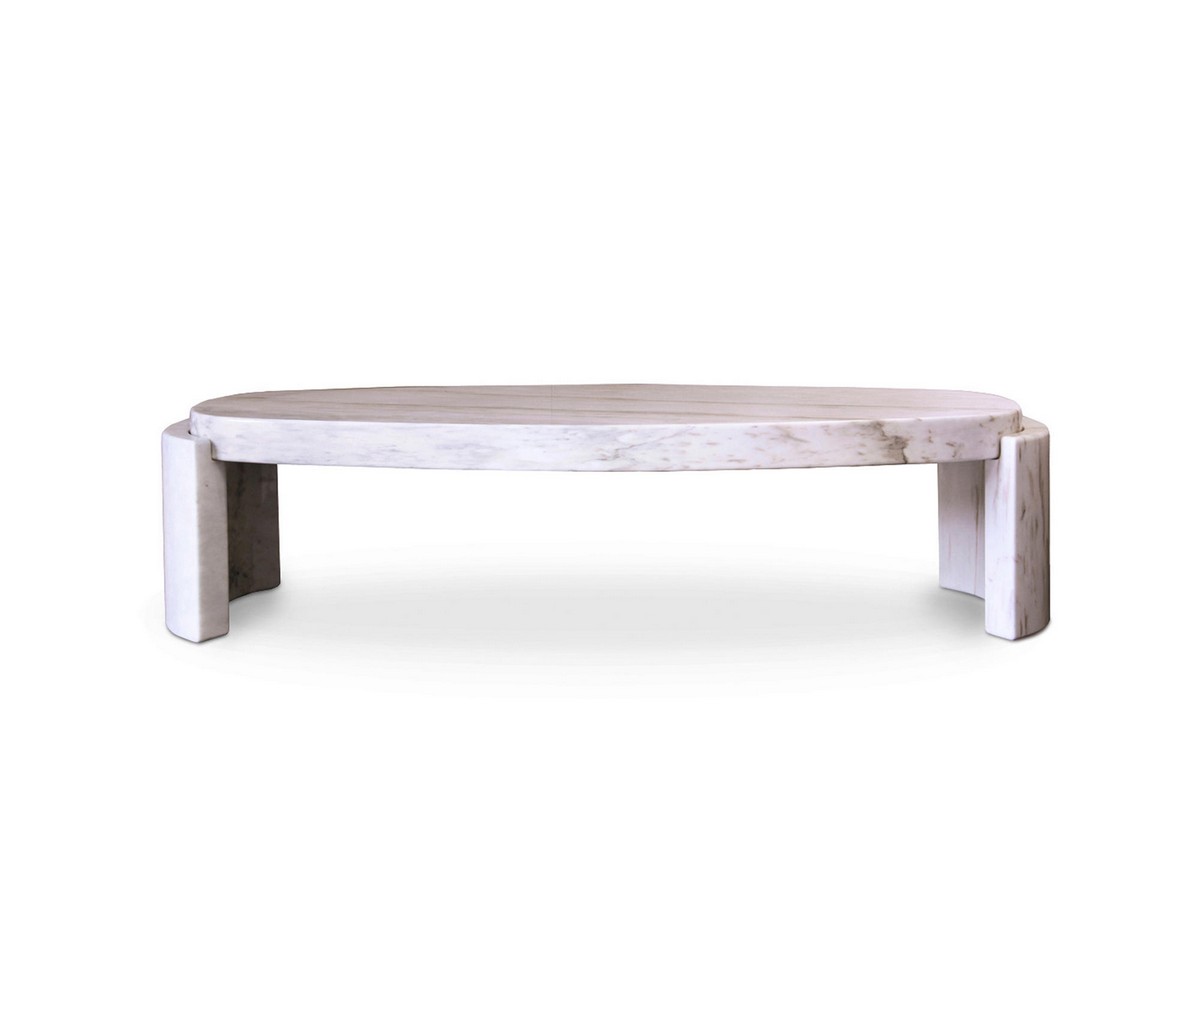 Tacca Center Table: Design As A Universal Language